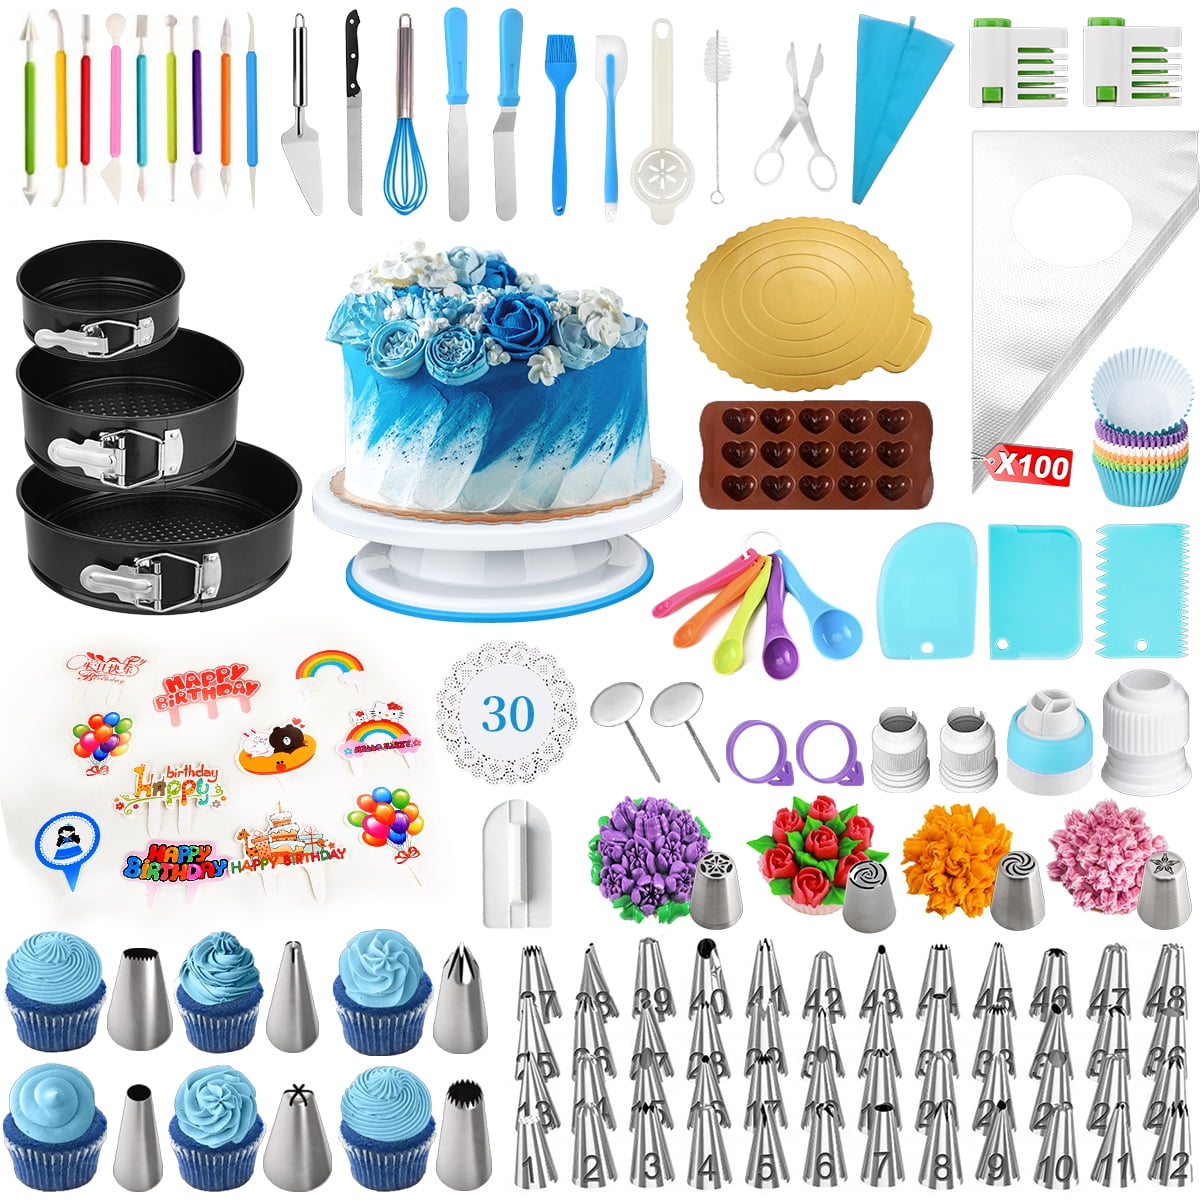 379 Cake Decorating Supplies Kit, Baking Pastry Tools with Cake Rotating Turntable Scraper Spatula Leveler & Icing Piping Tips with Pattern Chart, Baking Supplies for Beginner and - Walmart.com